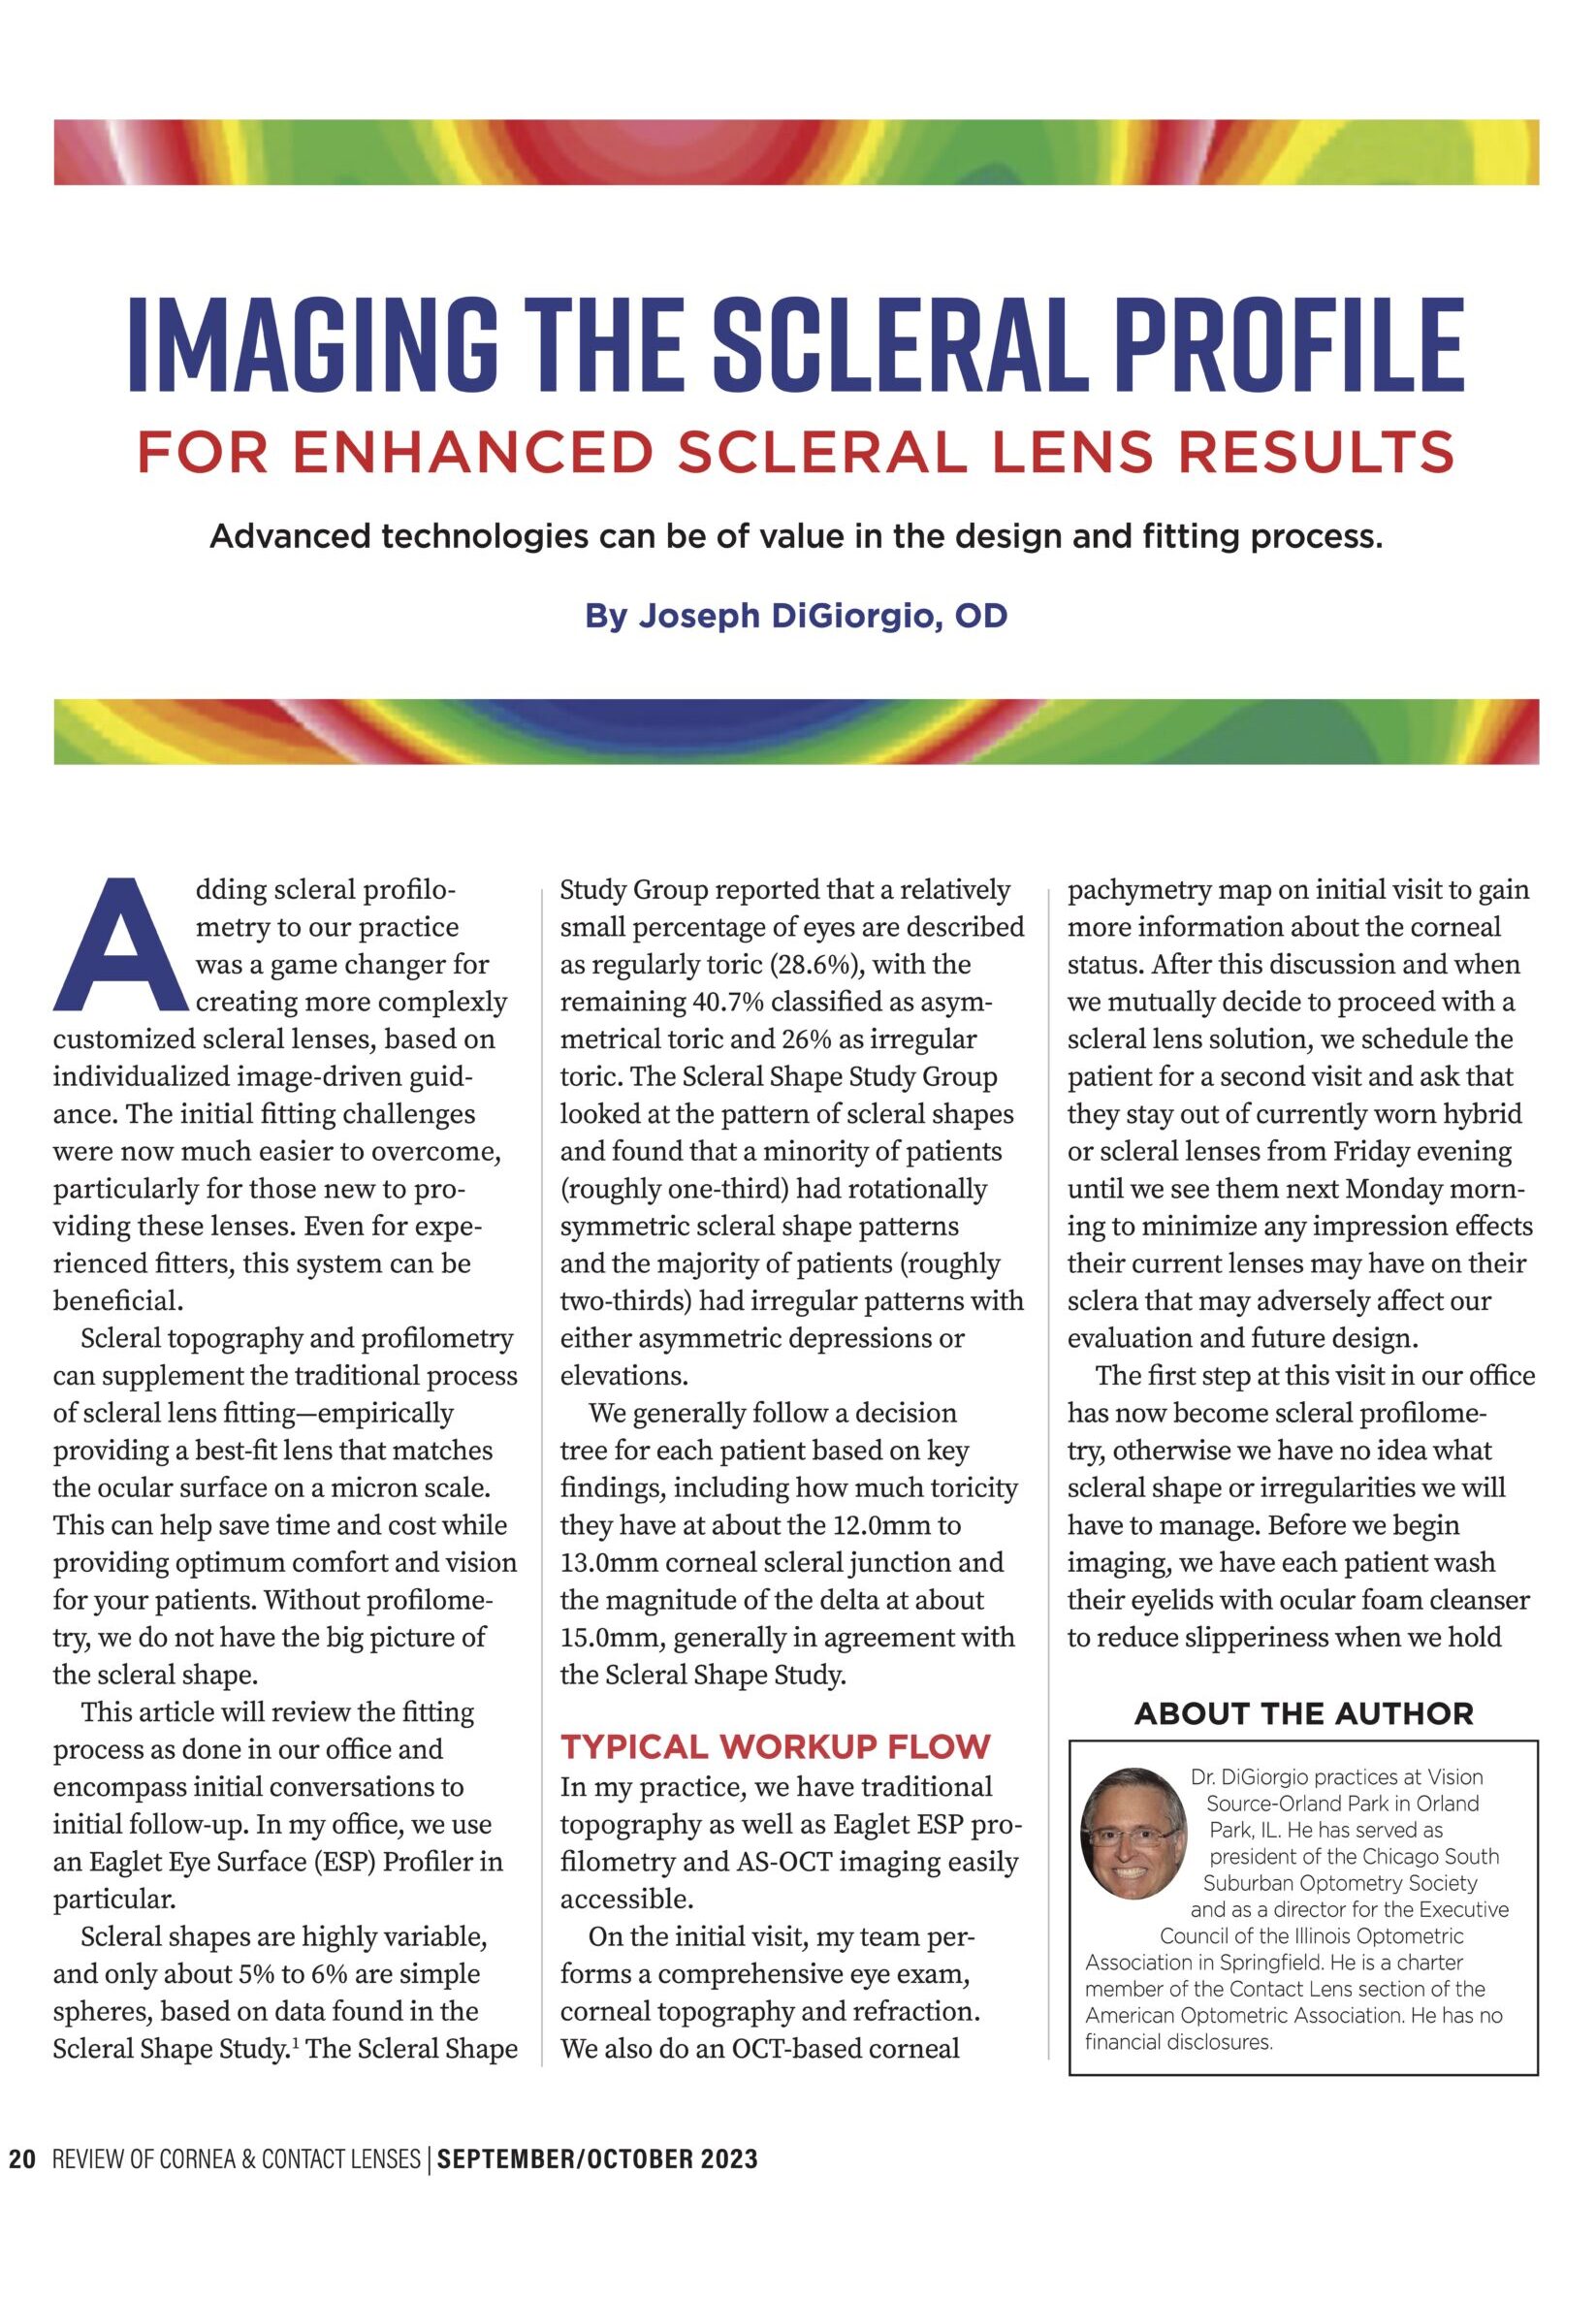 Imaging the Scleral Profile for Enhanced Scleral Lens Results By Joseph DiGiorgio, OD. PG 1